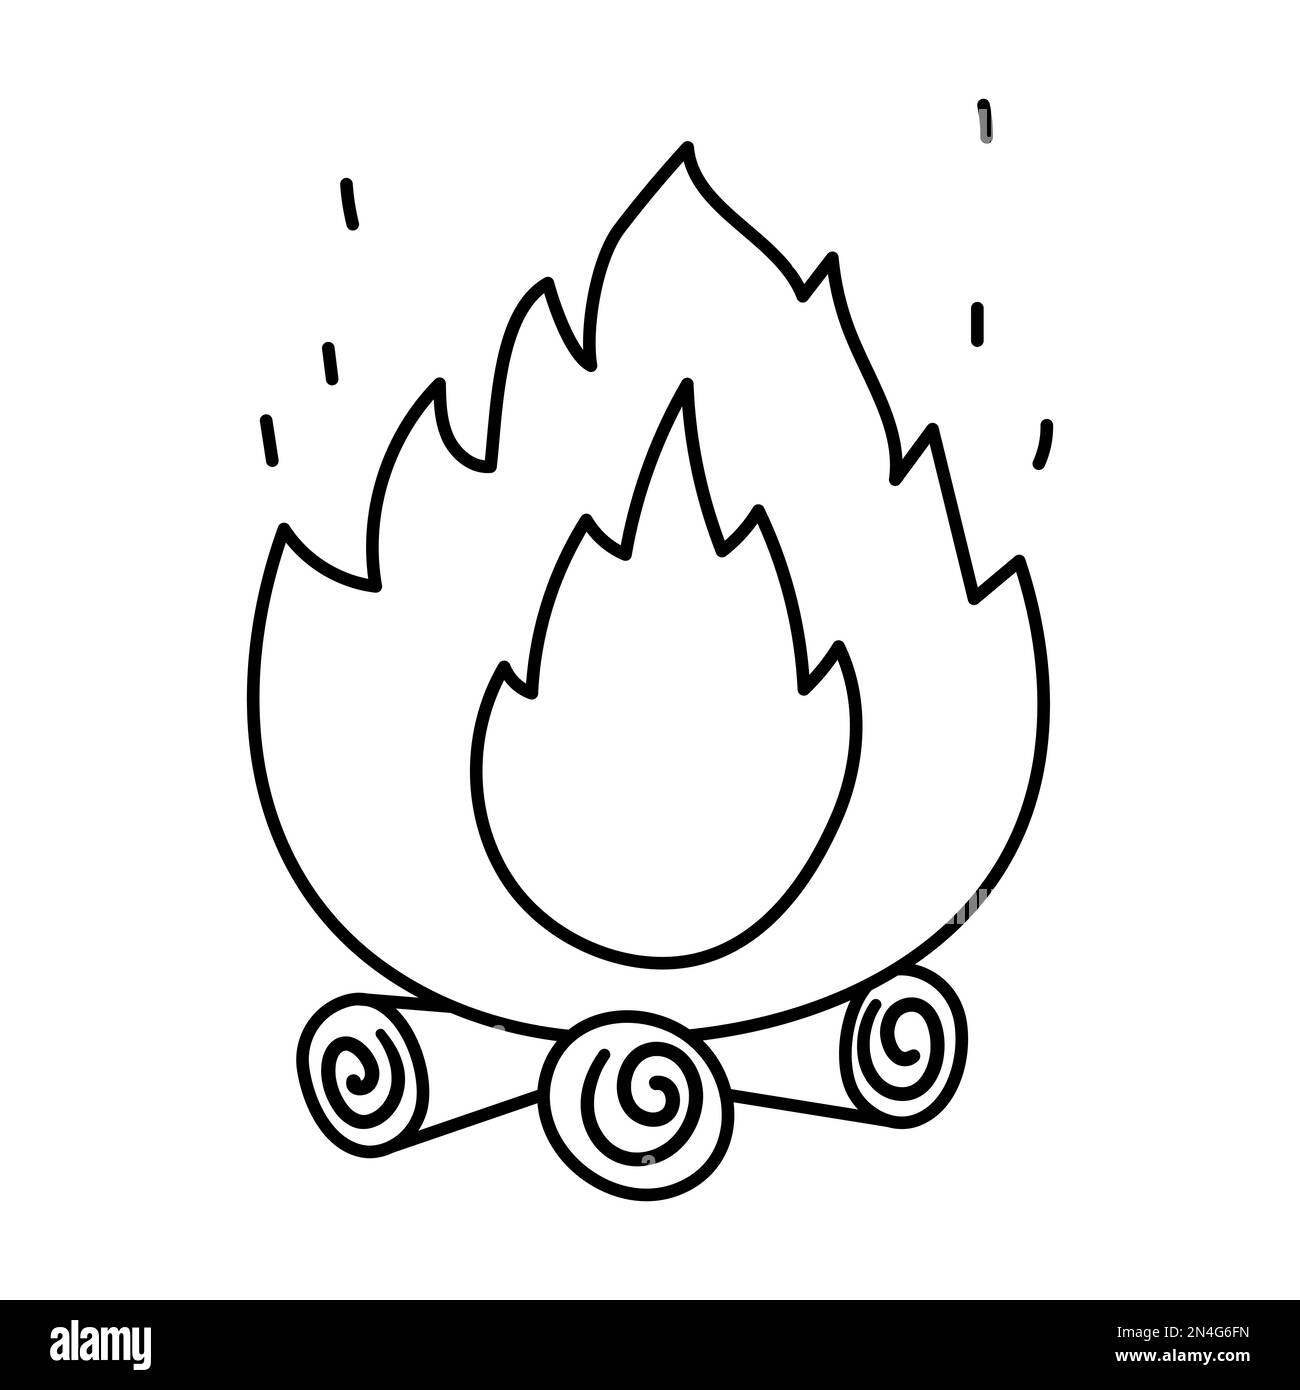 Cute black and white fire on the logs. Vector campfire illustration isolated on white background. Autumn or Summer season bonfire line icon for print, Stock Vector